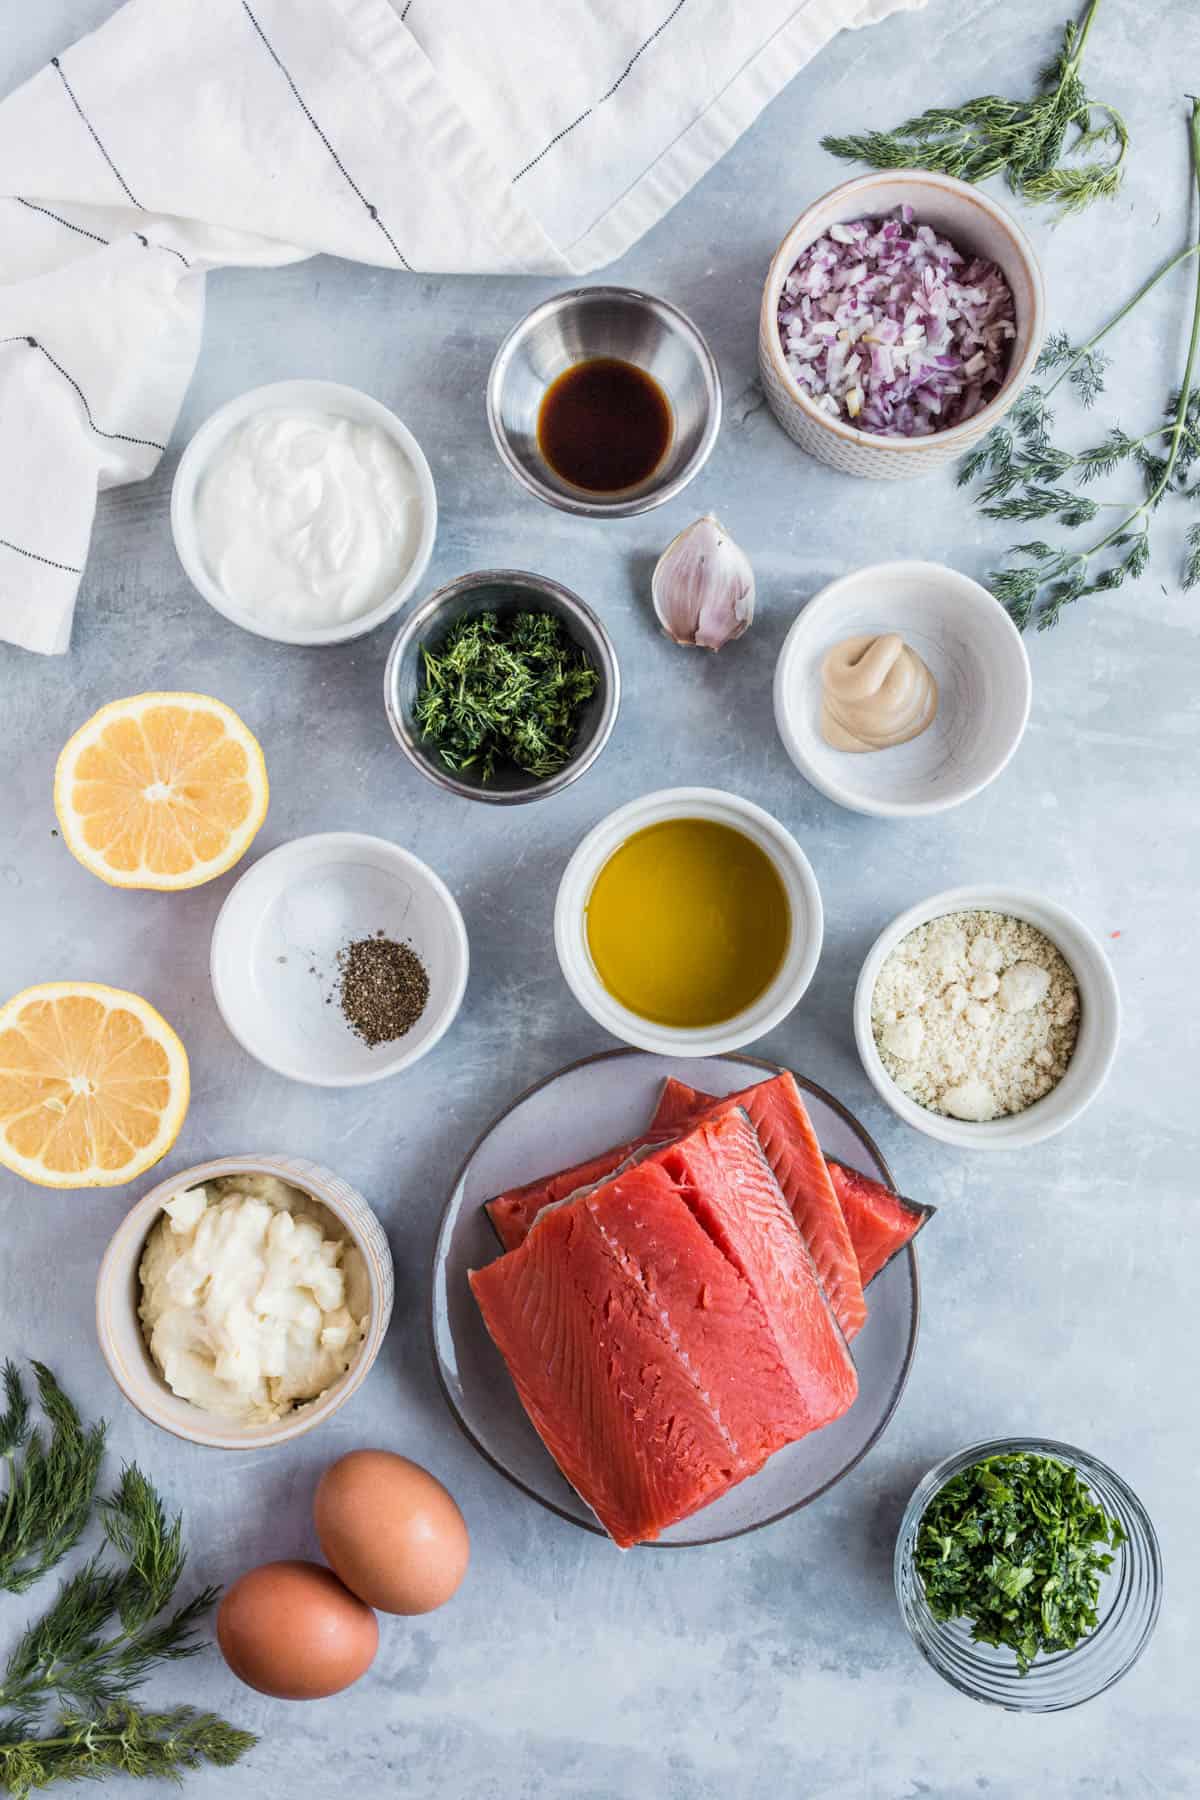 all of the ingredients for salmon patties on a countertop.